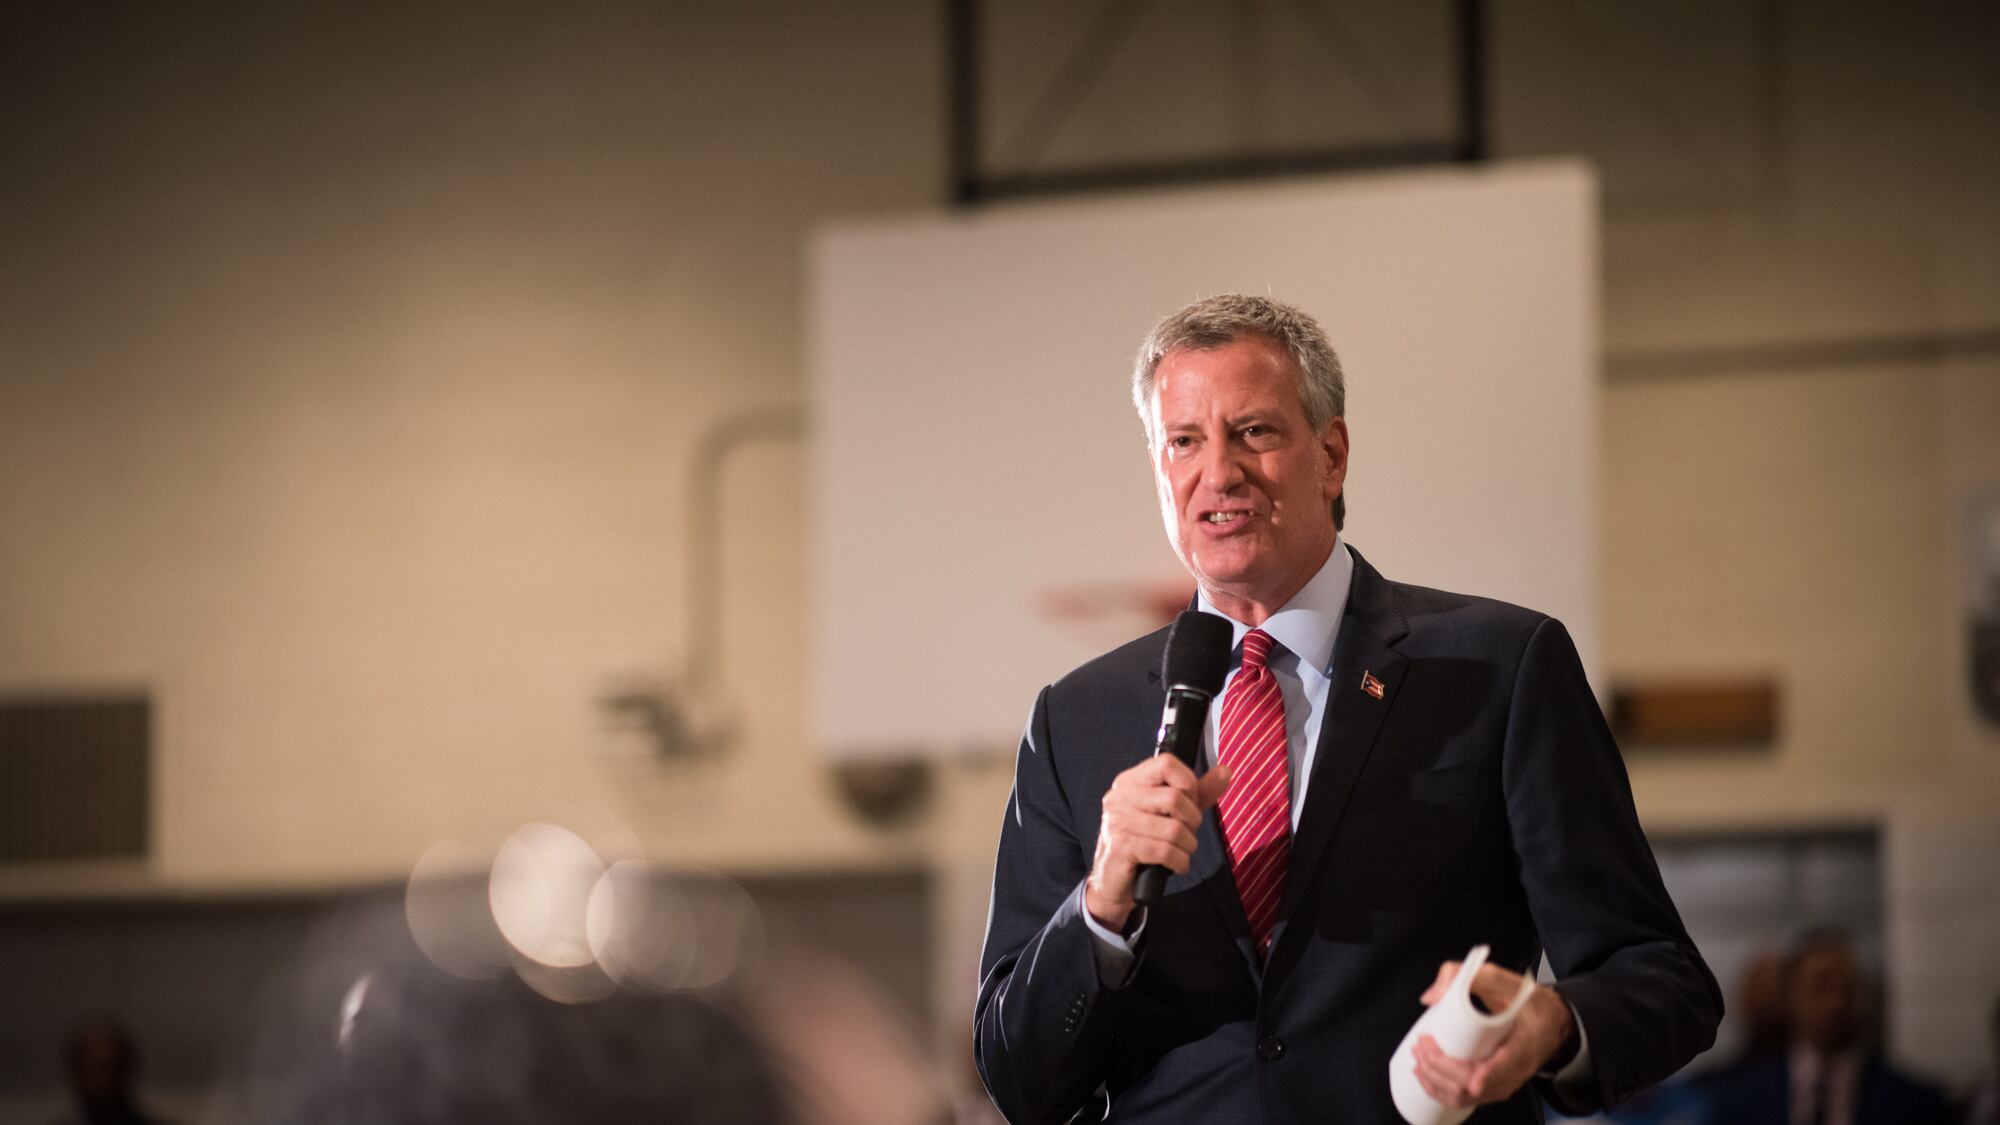 Mayor Bill de Blasio announced a phased-in approach to starting the school year, with the youngest students and those with disabilities attending in-person classes first. 